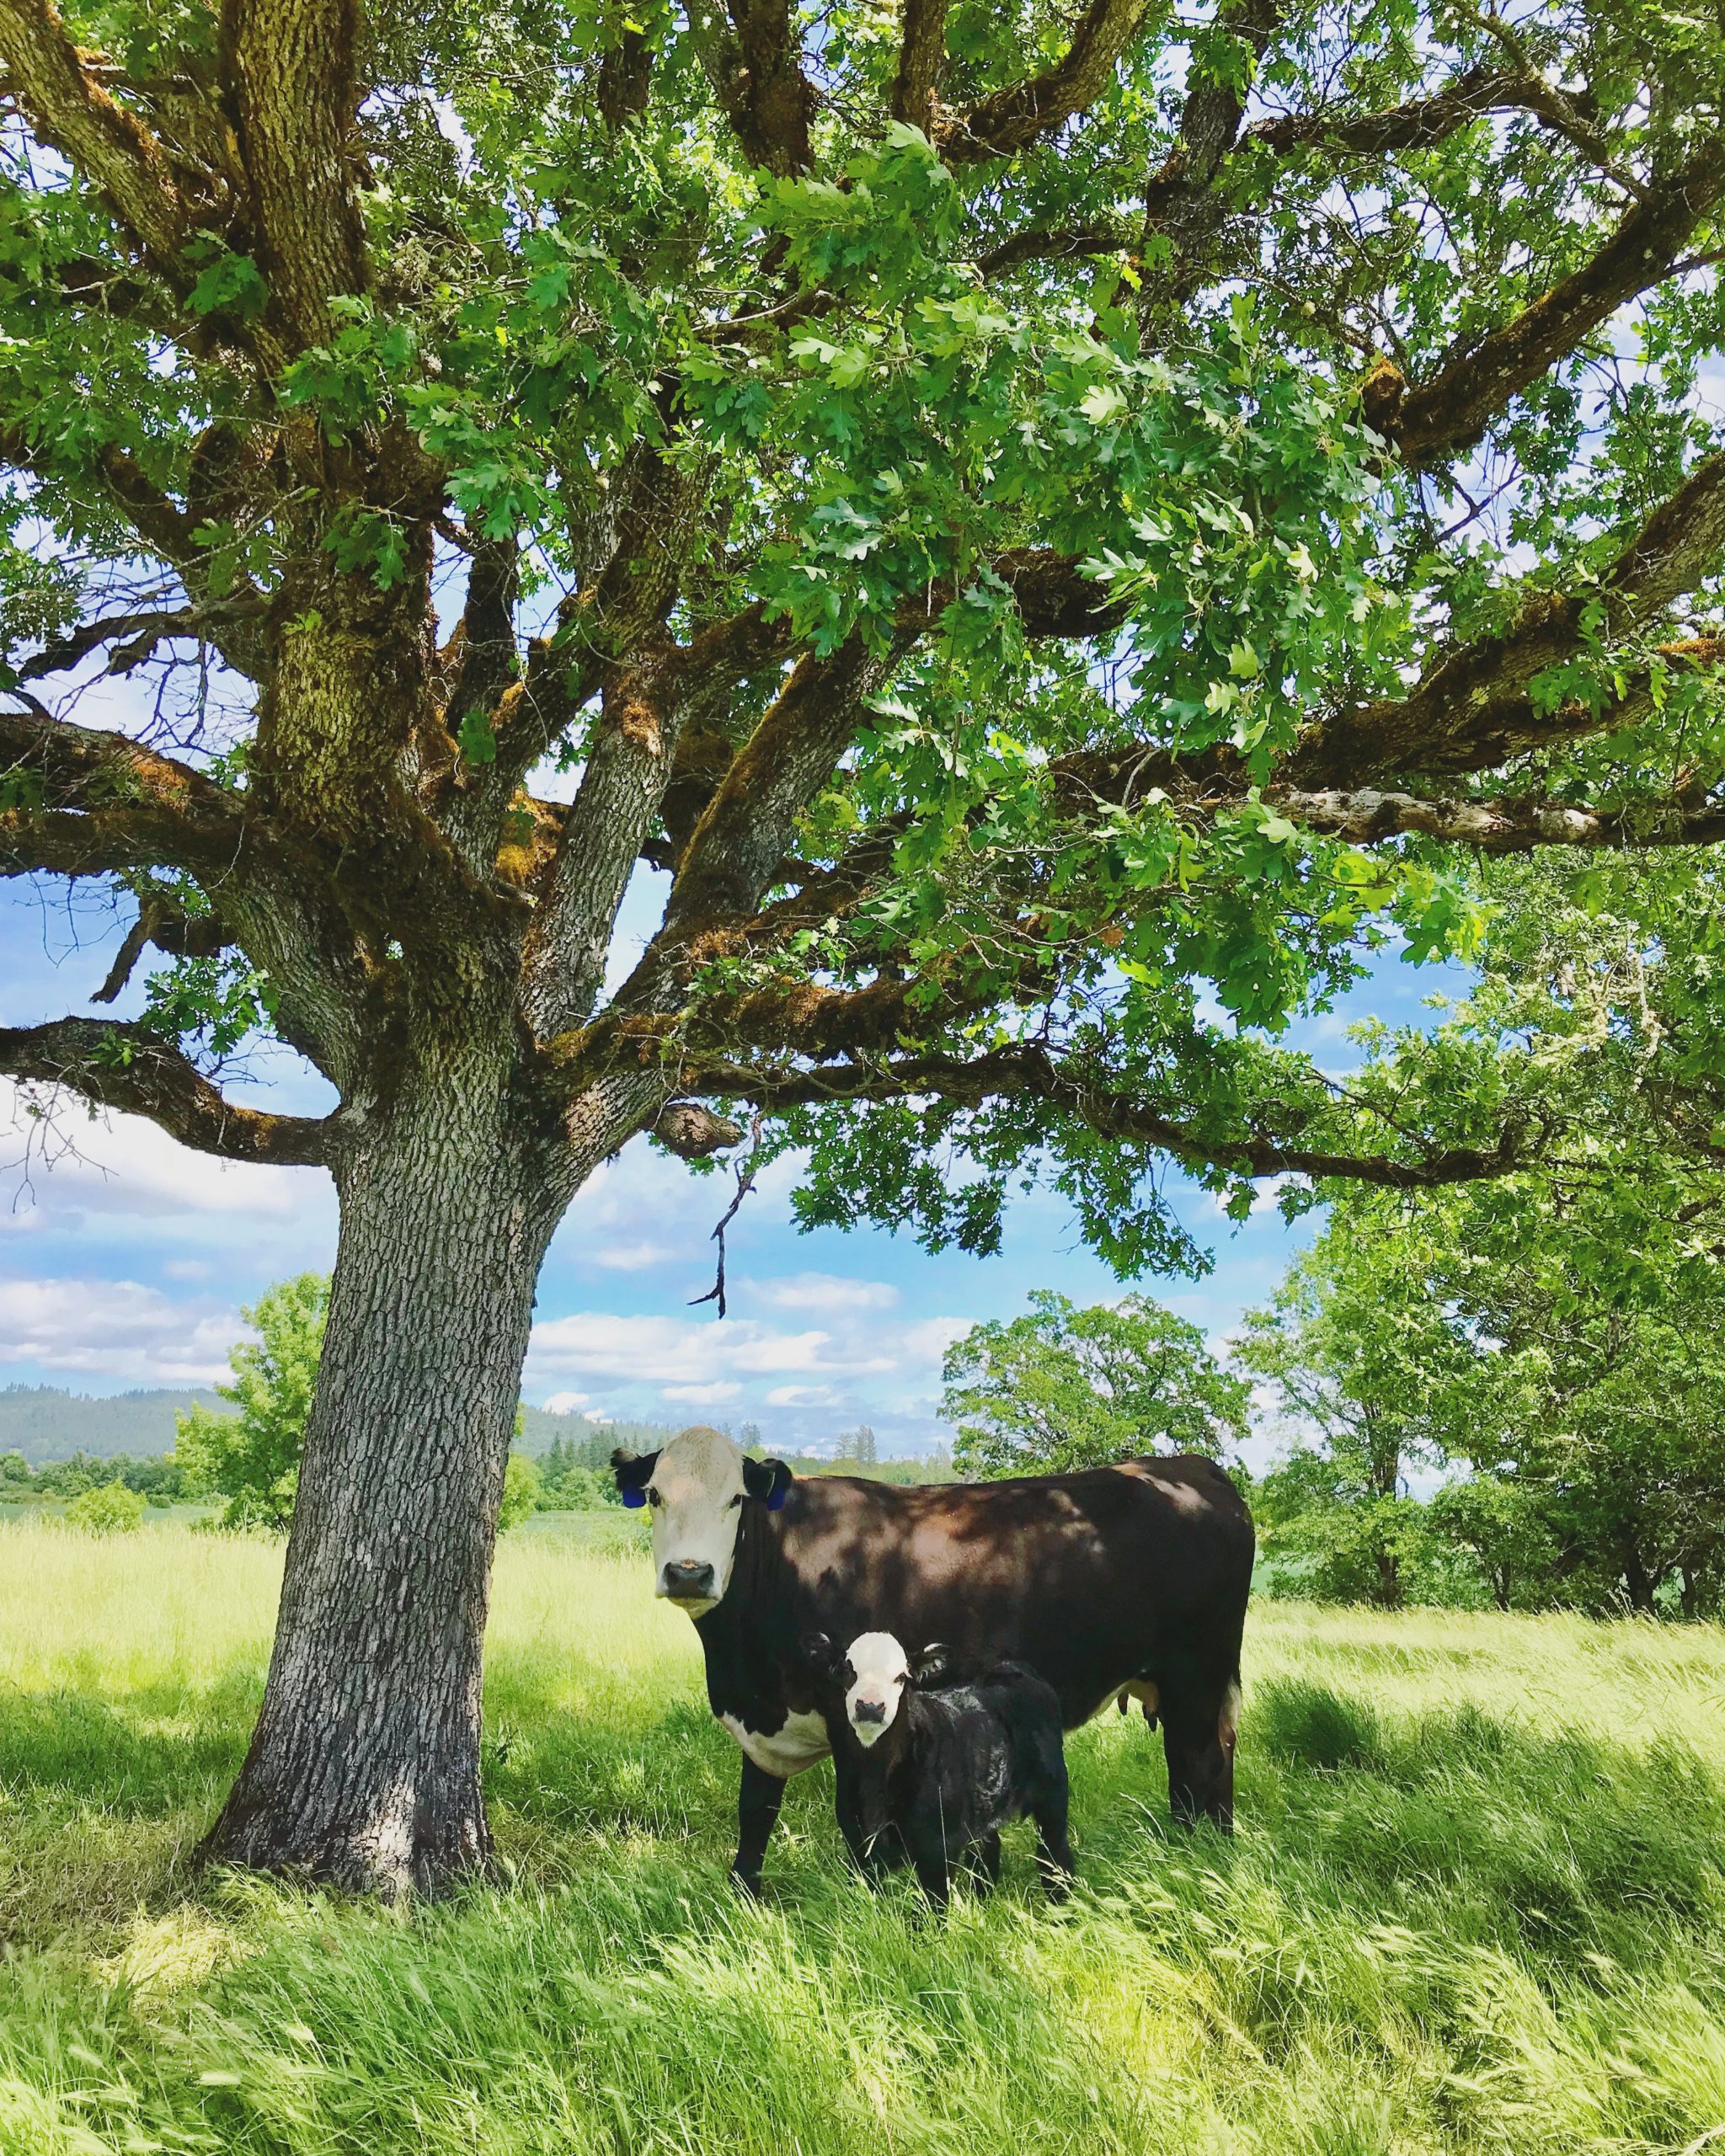 A mother cow and her baby calf standing under an oak tree.